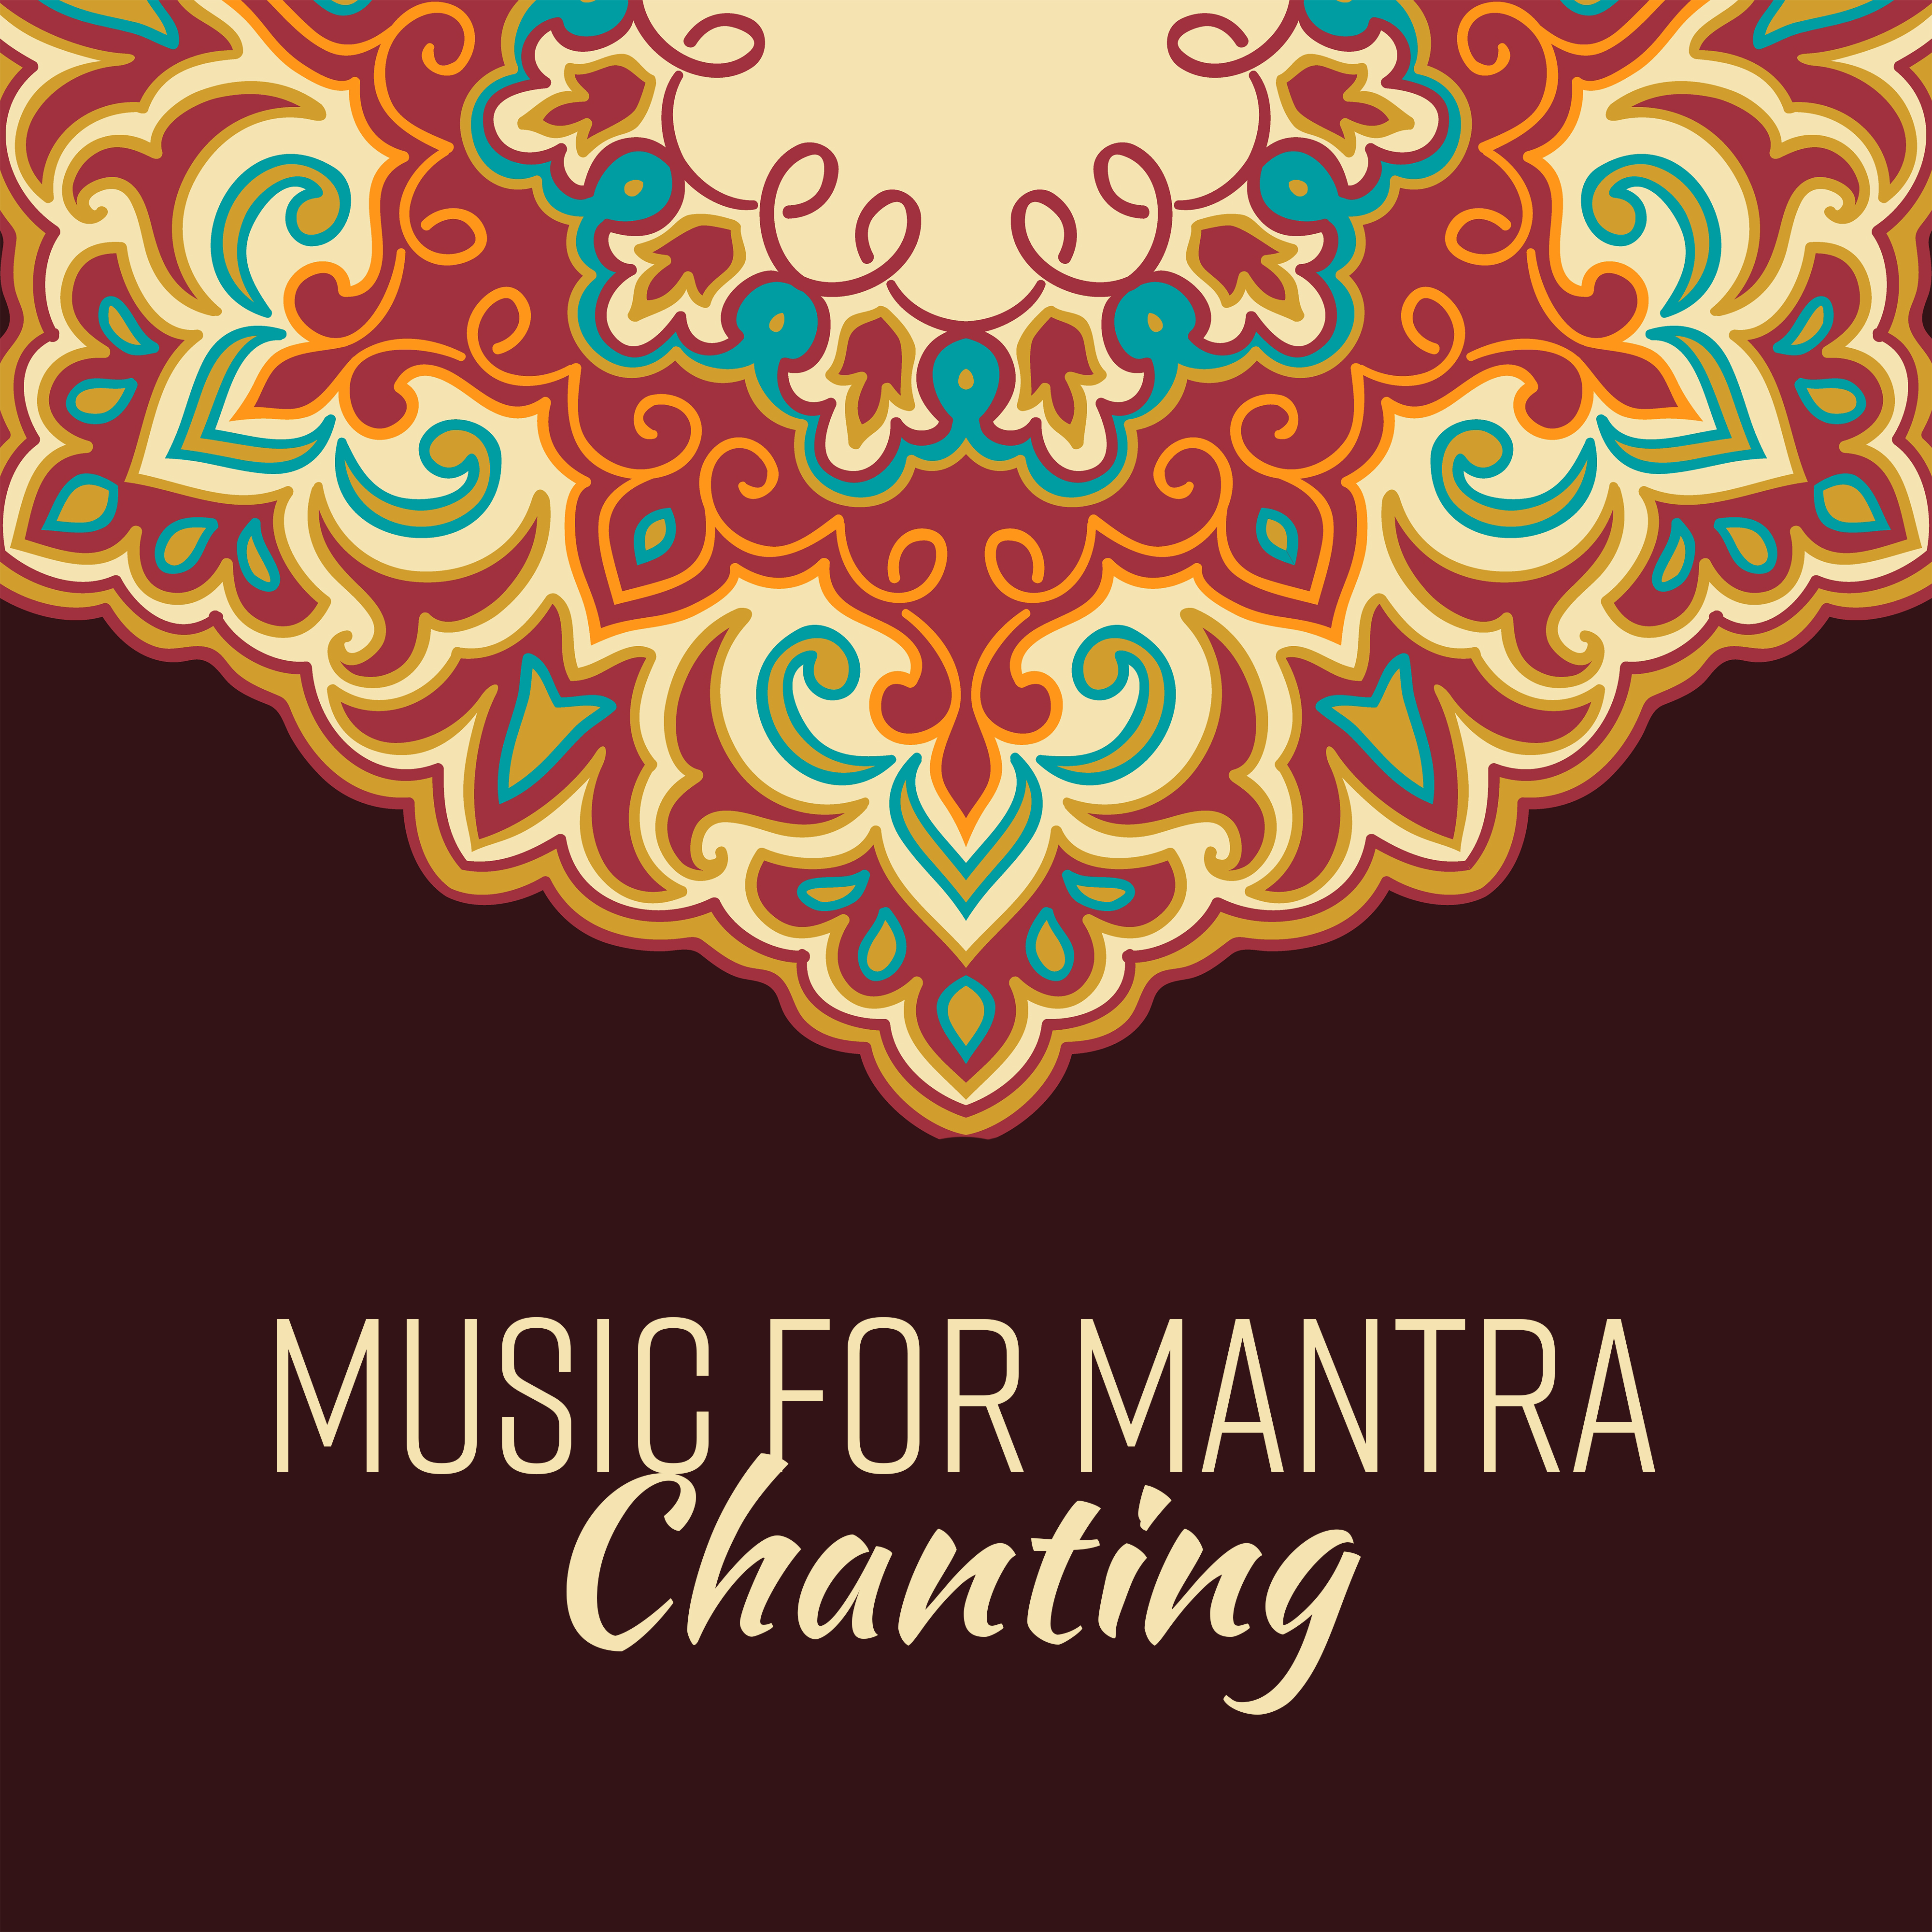 Music for Mantra Chanting